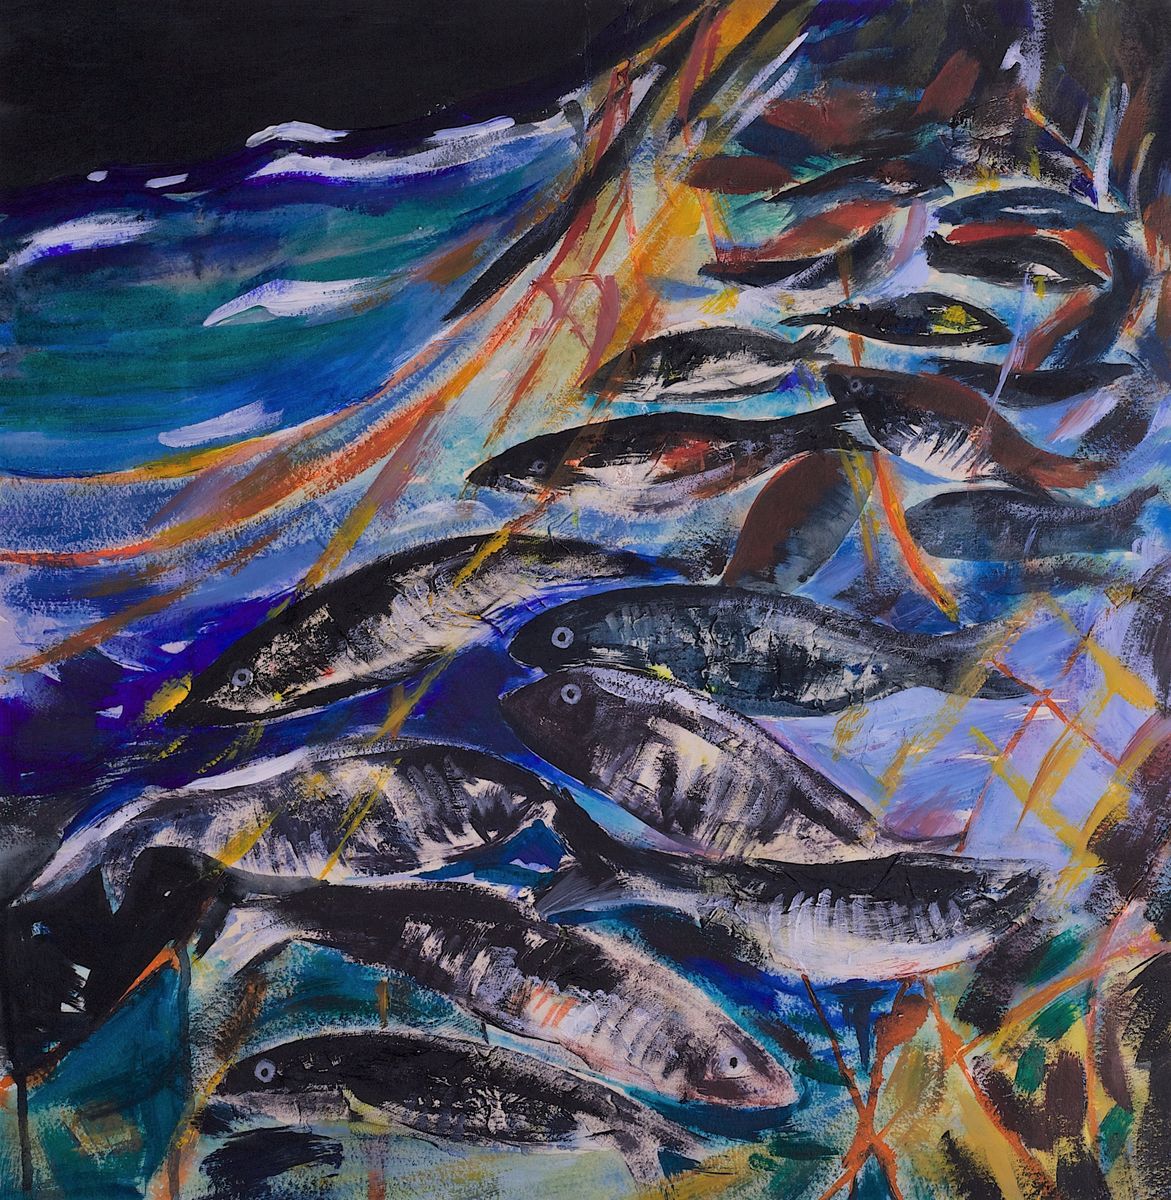 A print from an original acrylic painting of herring caught in nets below the sea by Scottish artist Jane Glue. 10% from the sales of this print will be donated to the charity of Sea Shepherd